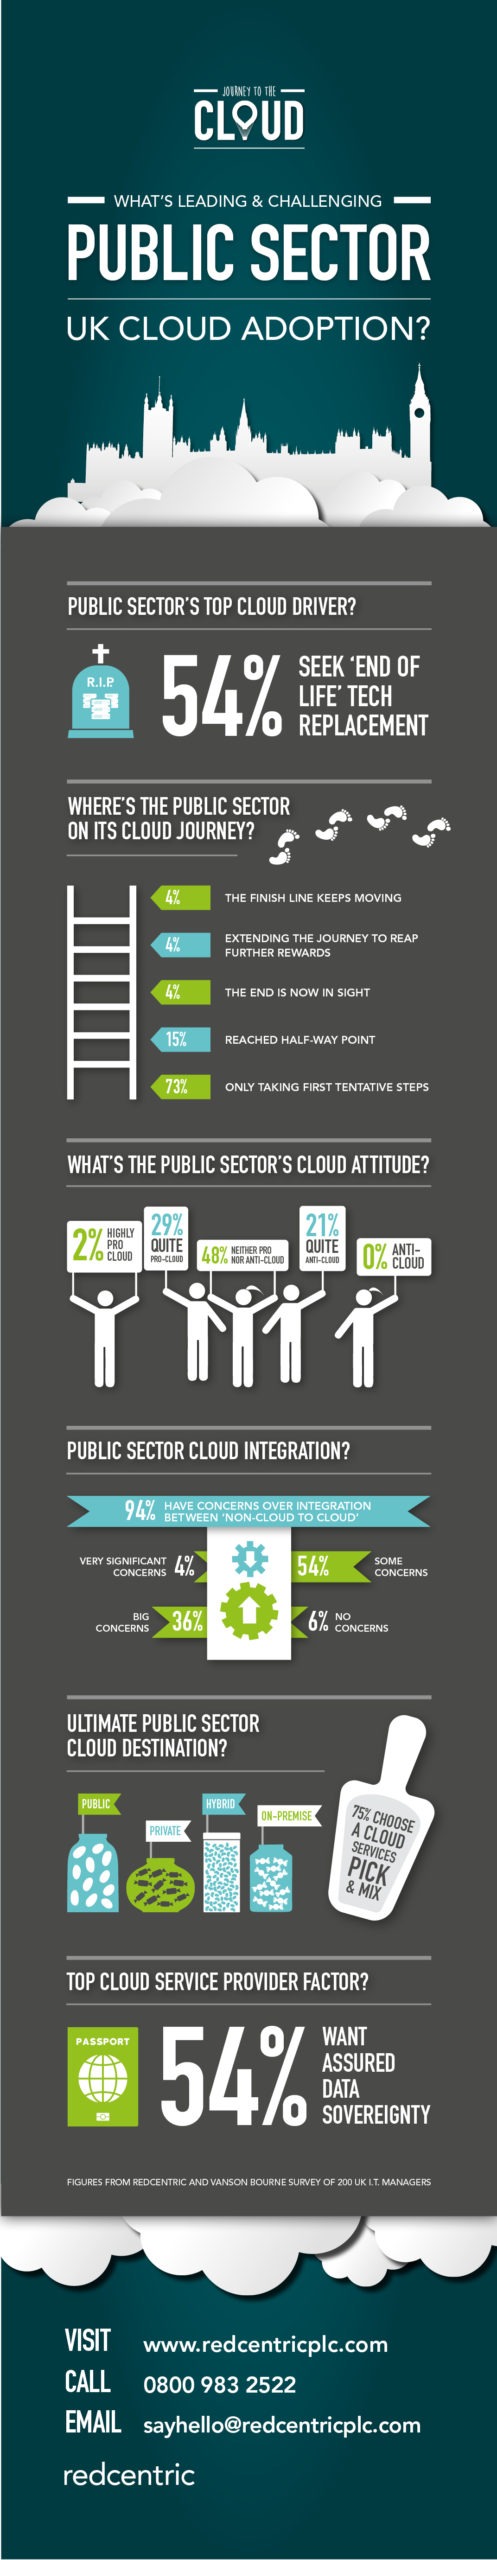 Journey to the cloud: public sector infographic